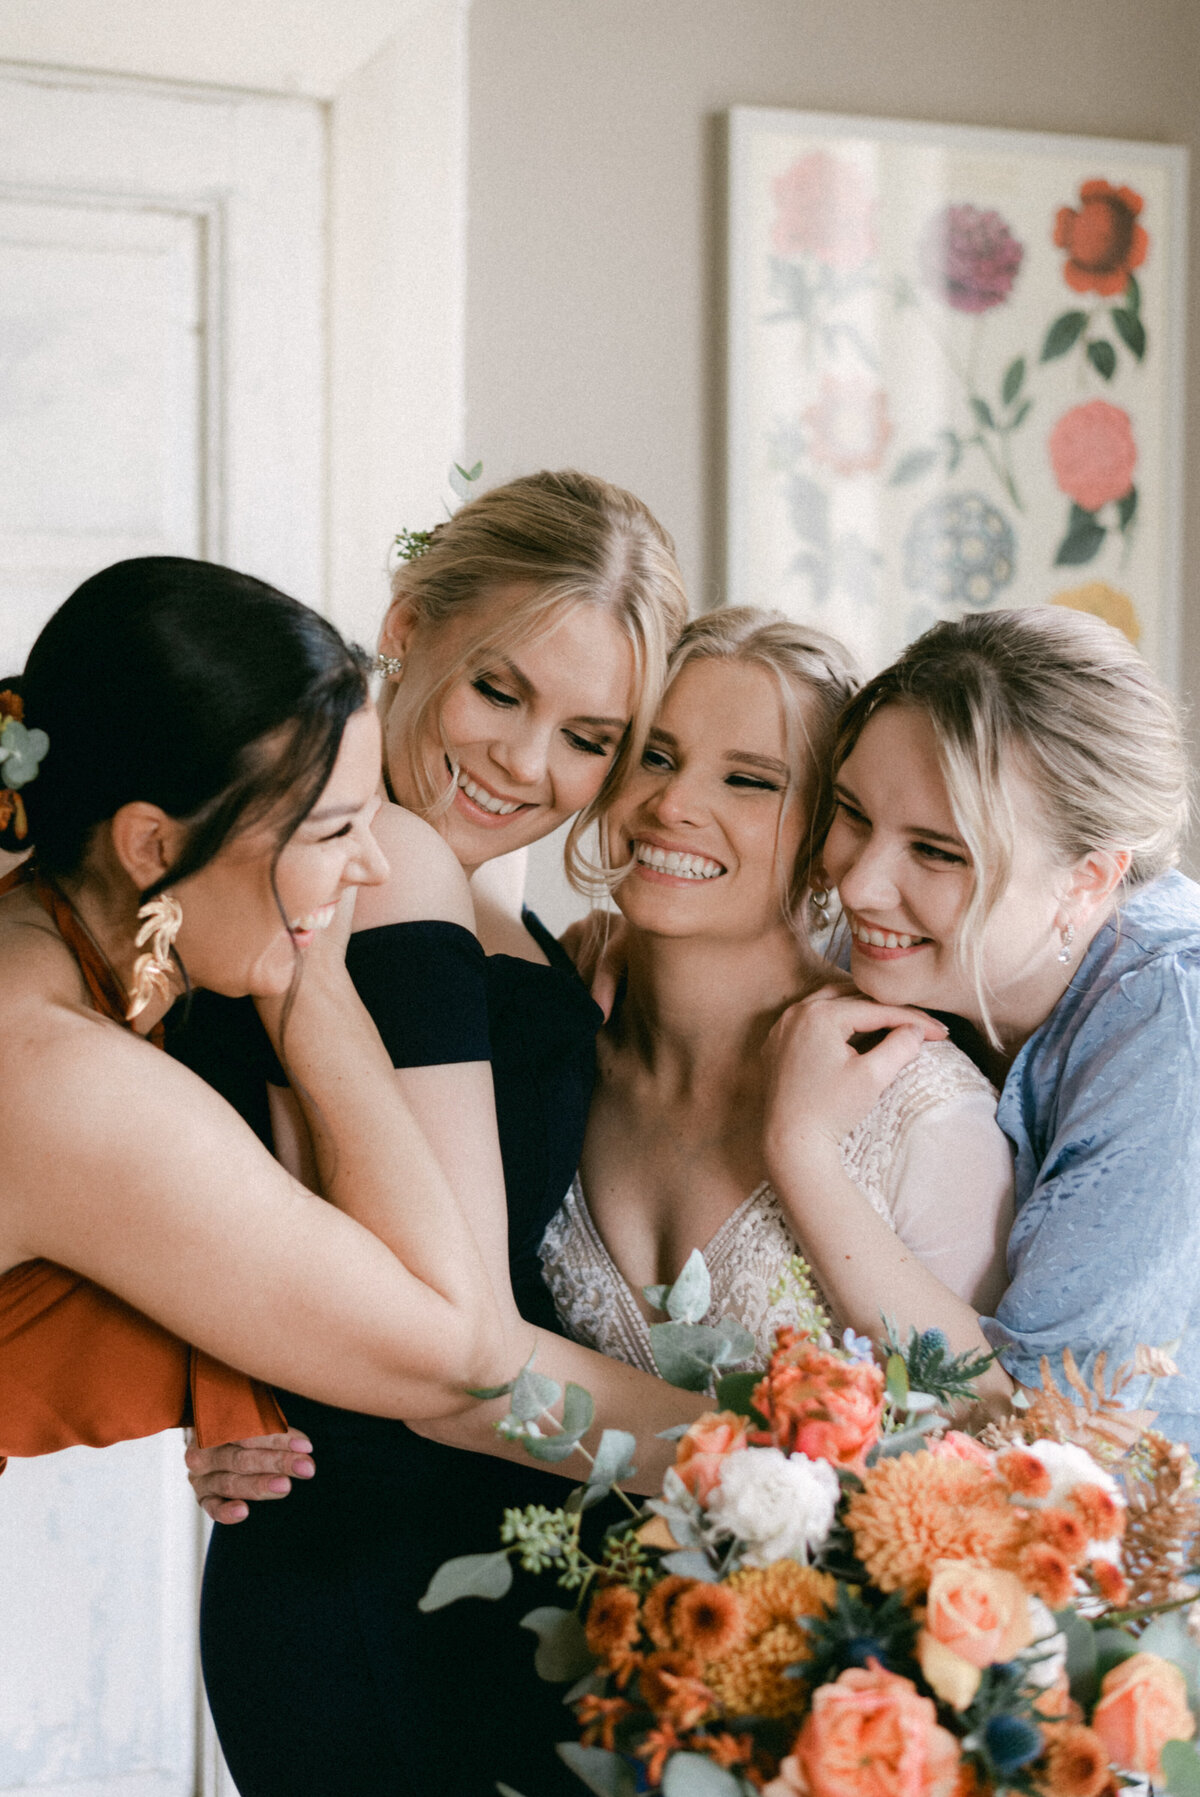 A portrait of the bride and her bridesmaids in Oitbacka gård captured by wedding photographer Hannika Gabrielsson in Finland